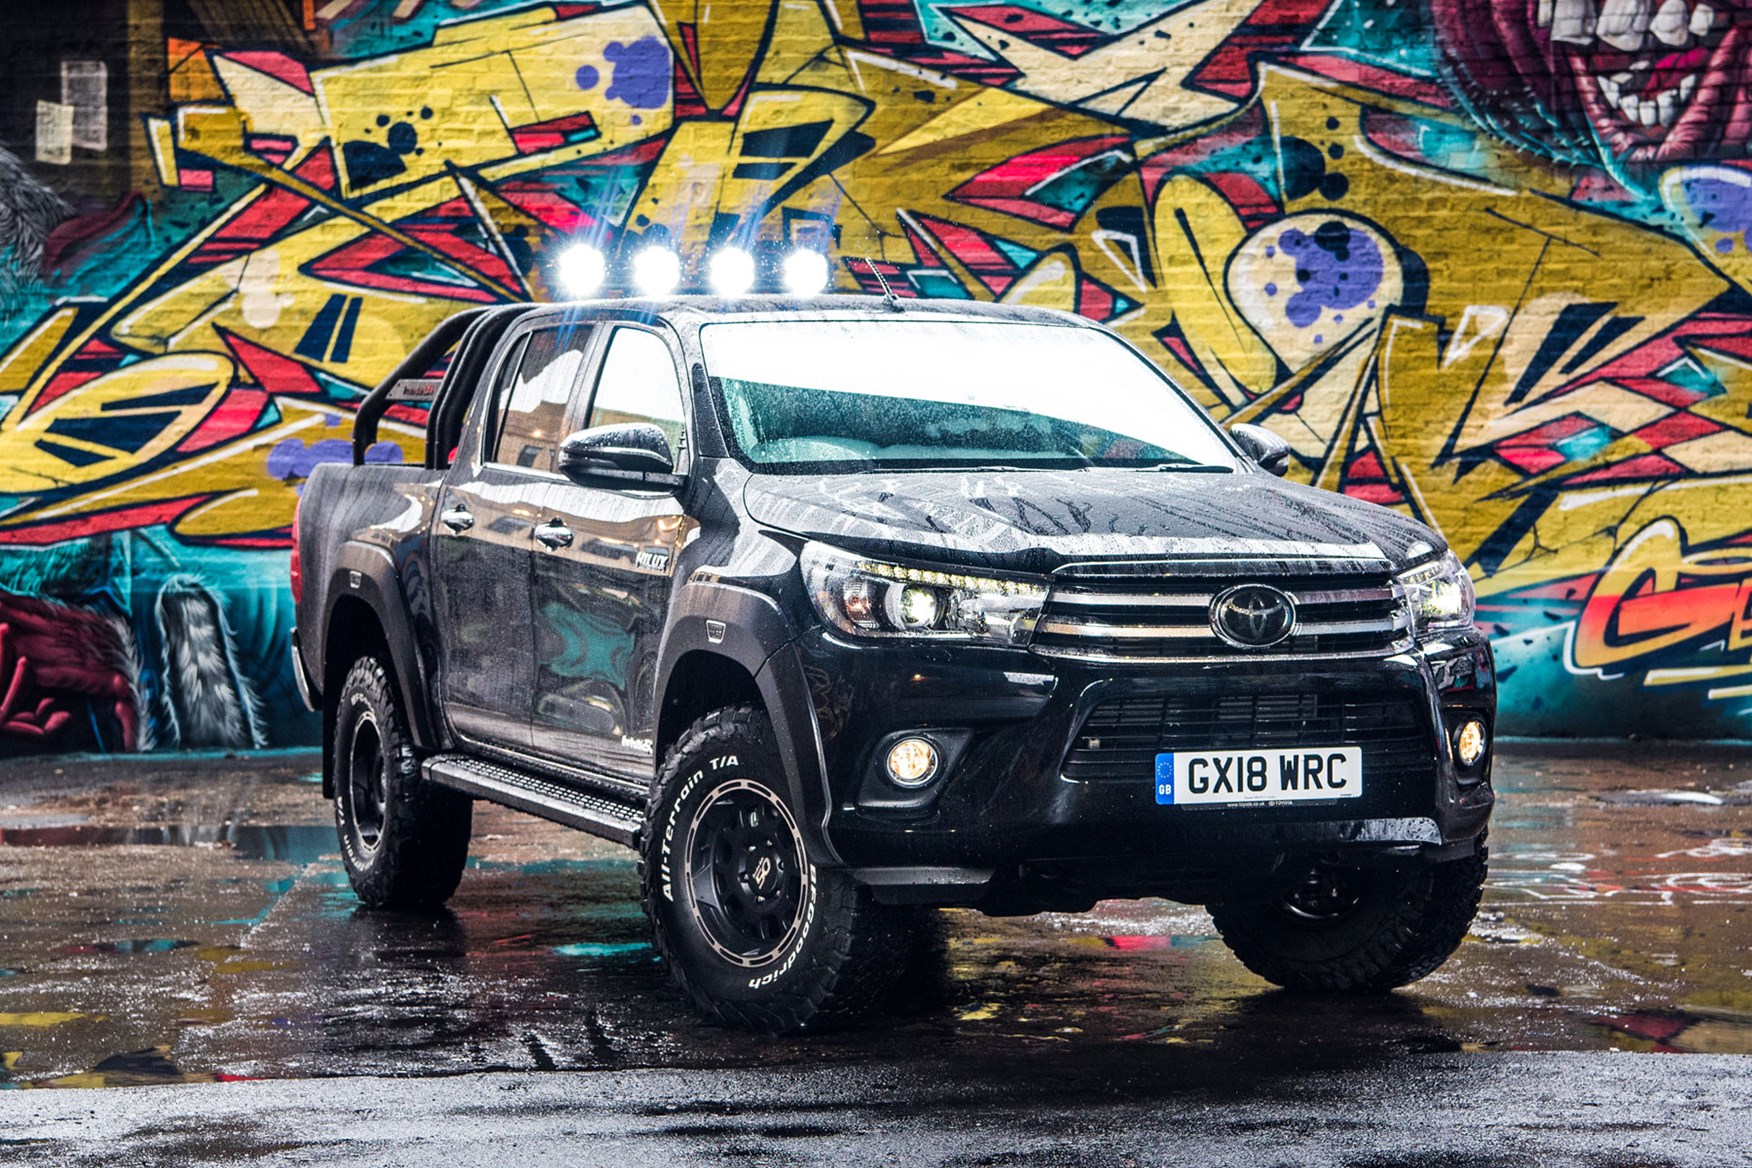 Toyota Hilux review - Invincible 50 special edition, black, front view, spotlights on